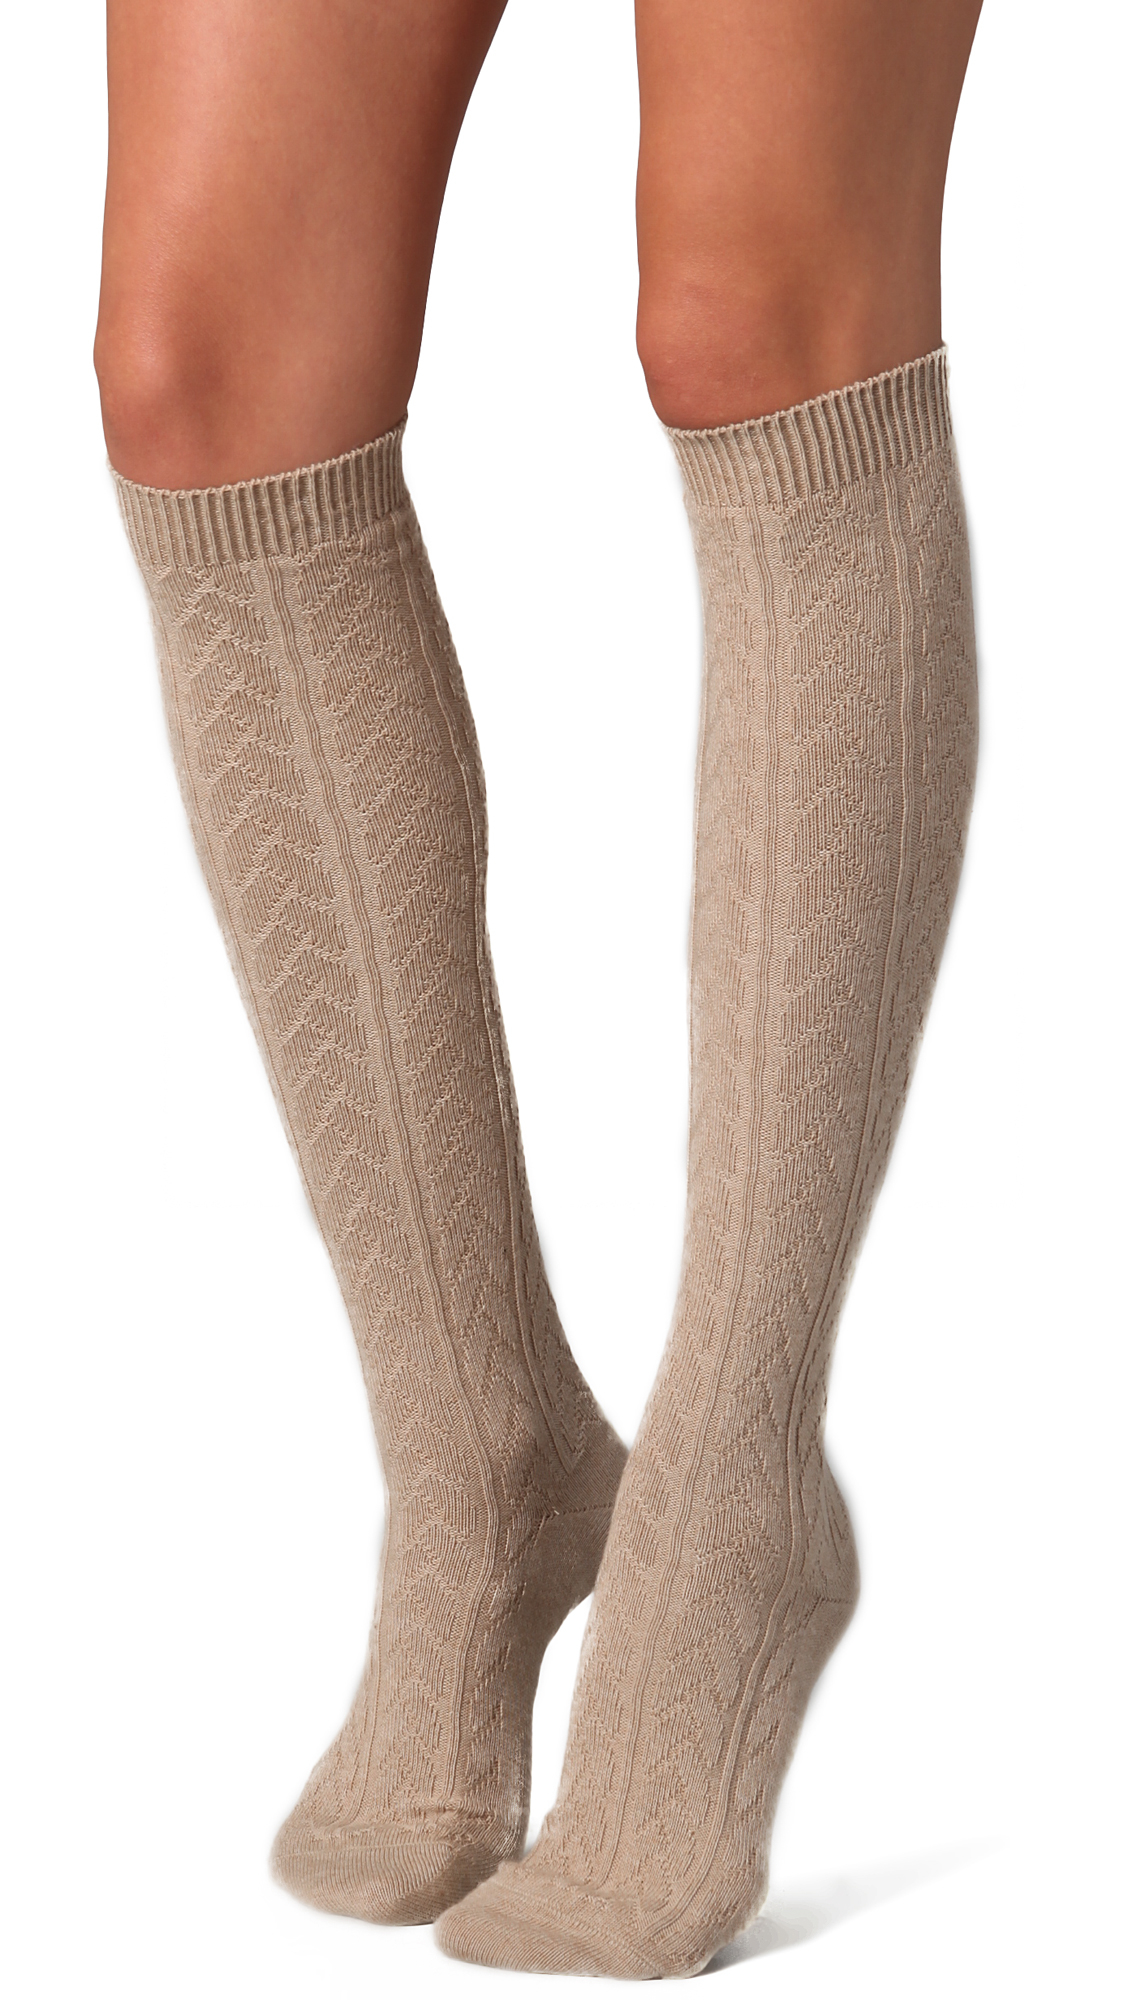 Lyst - Falke Striggings Cable Knit Knee High Socks - Grey in Natural